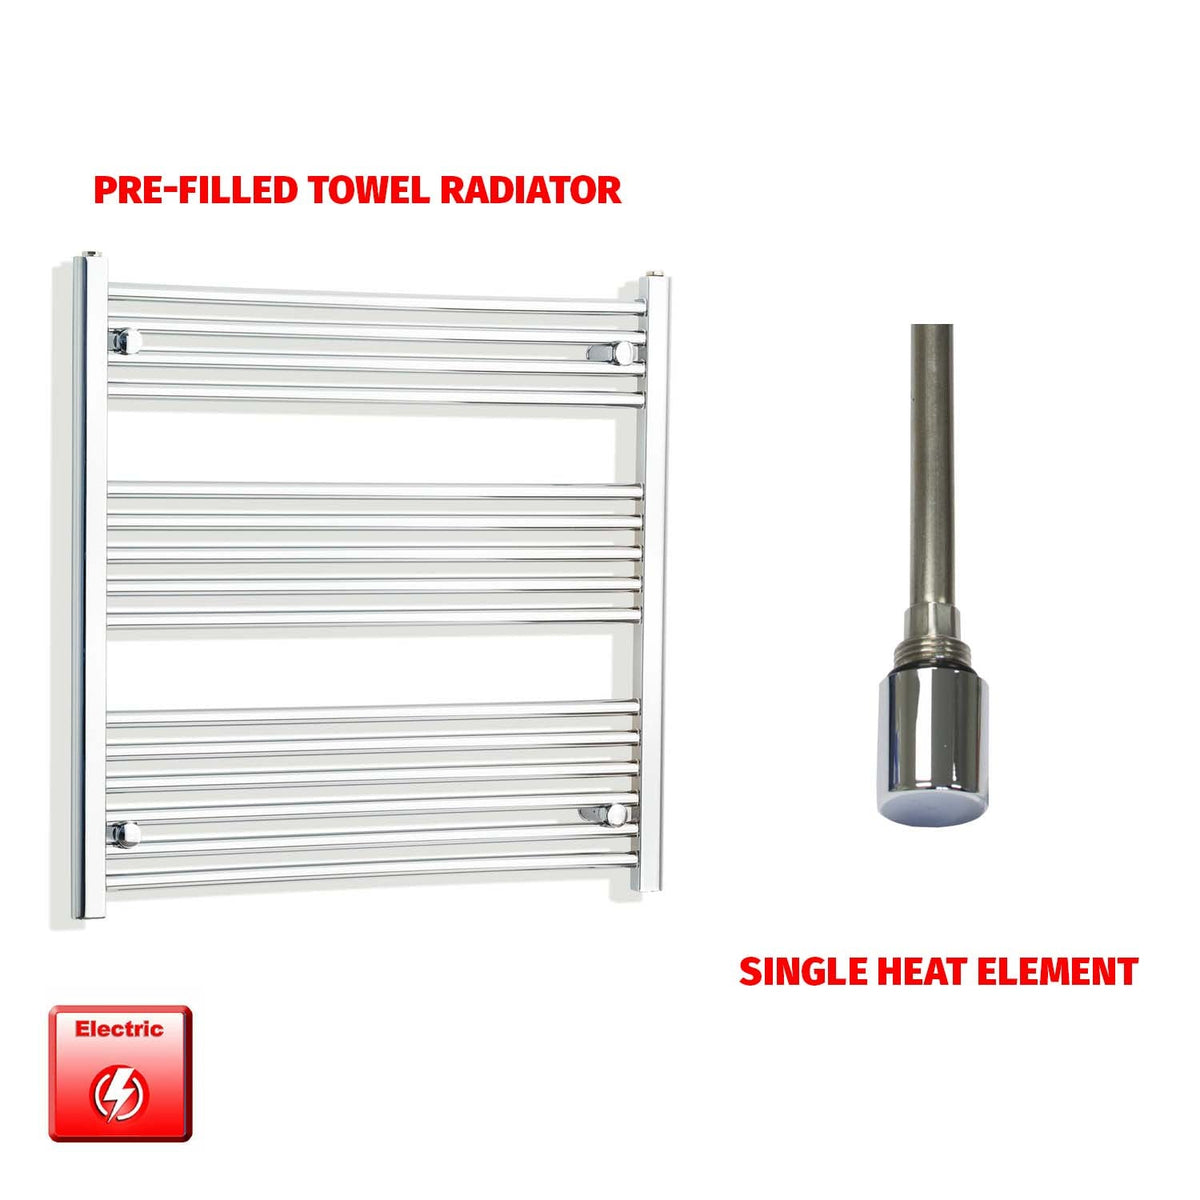 800 x 750 Pre-Filled Electric Heated Towel Radiator Curved or Straight Chrome Single heat element no timer